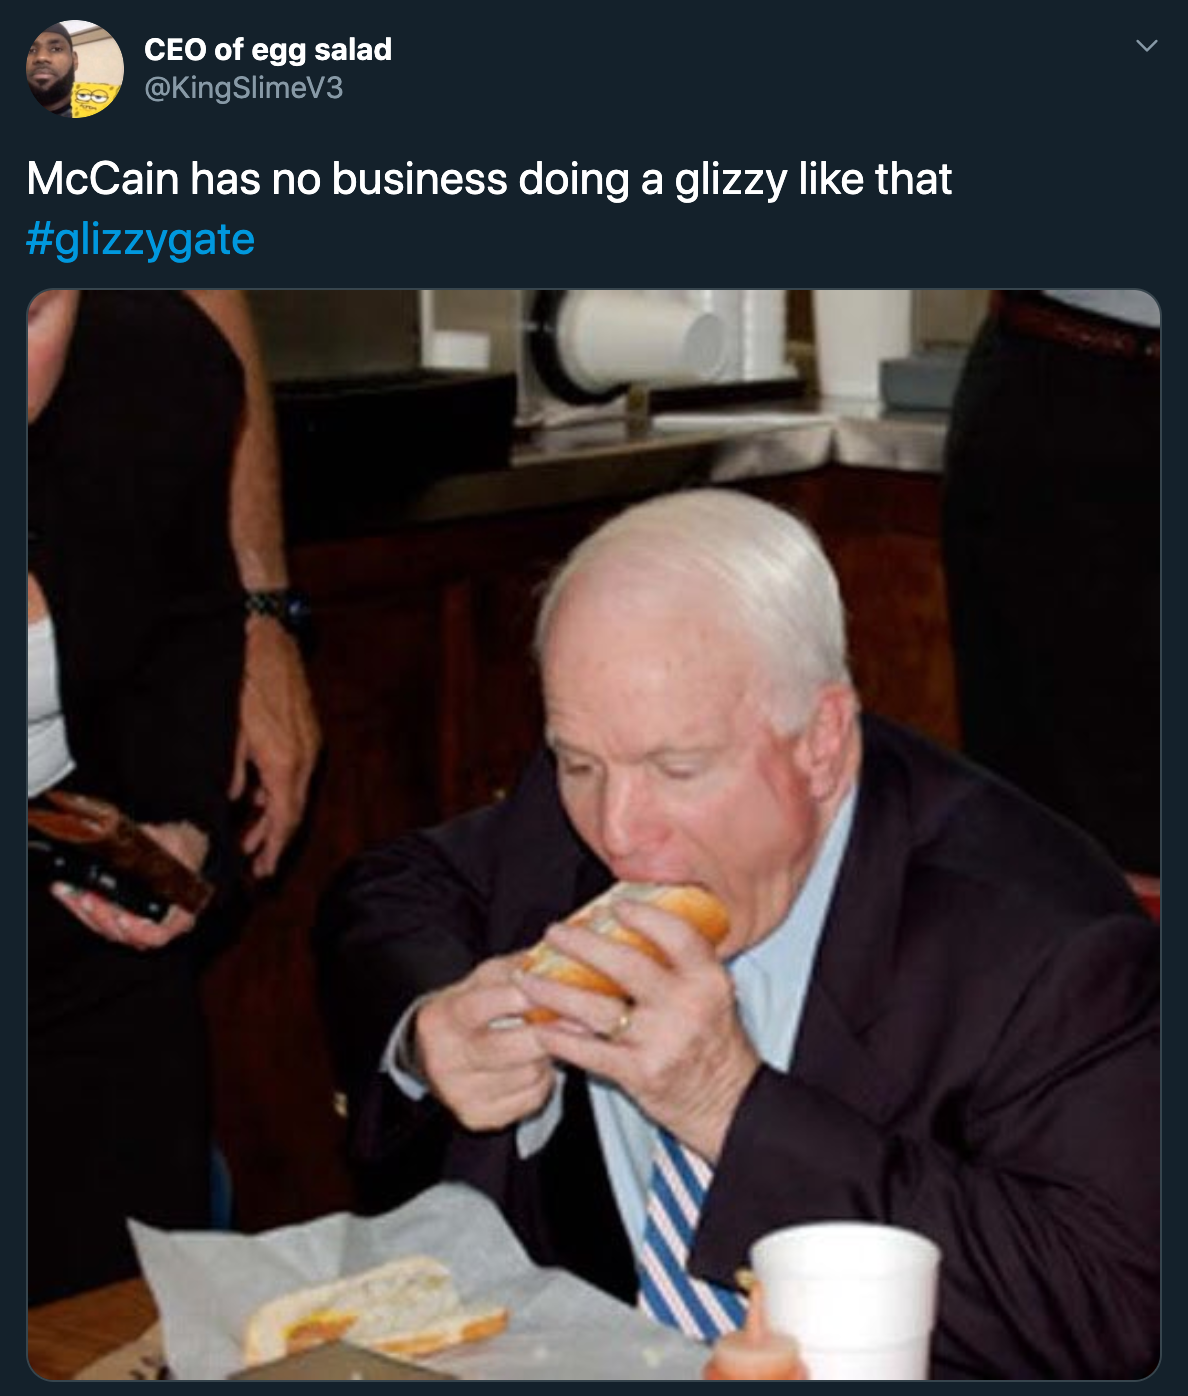 McCain has no business doing a glizzy that